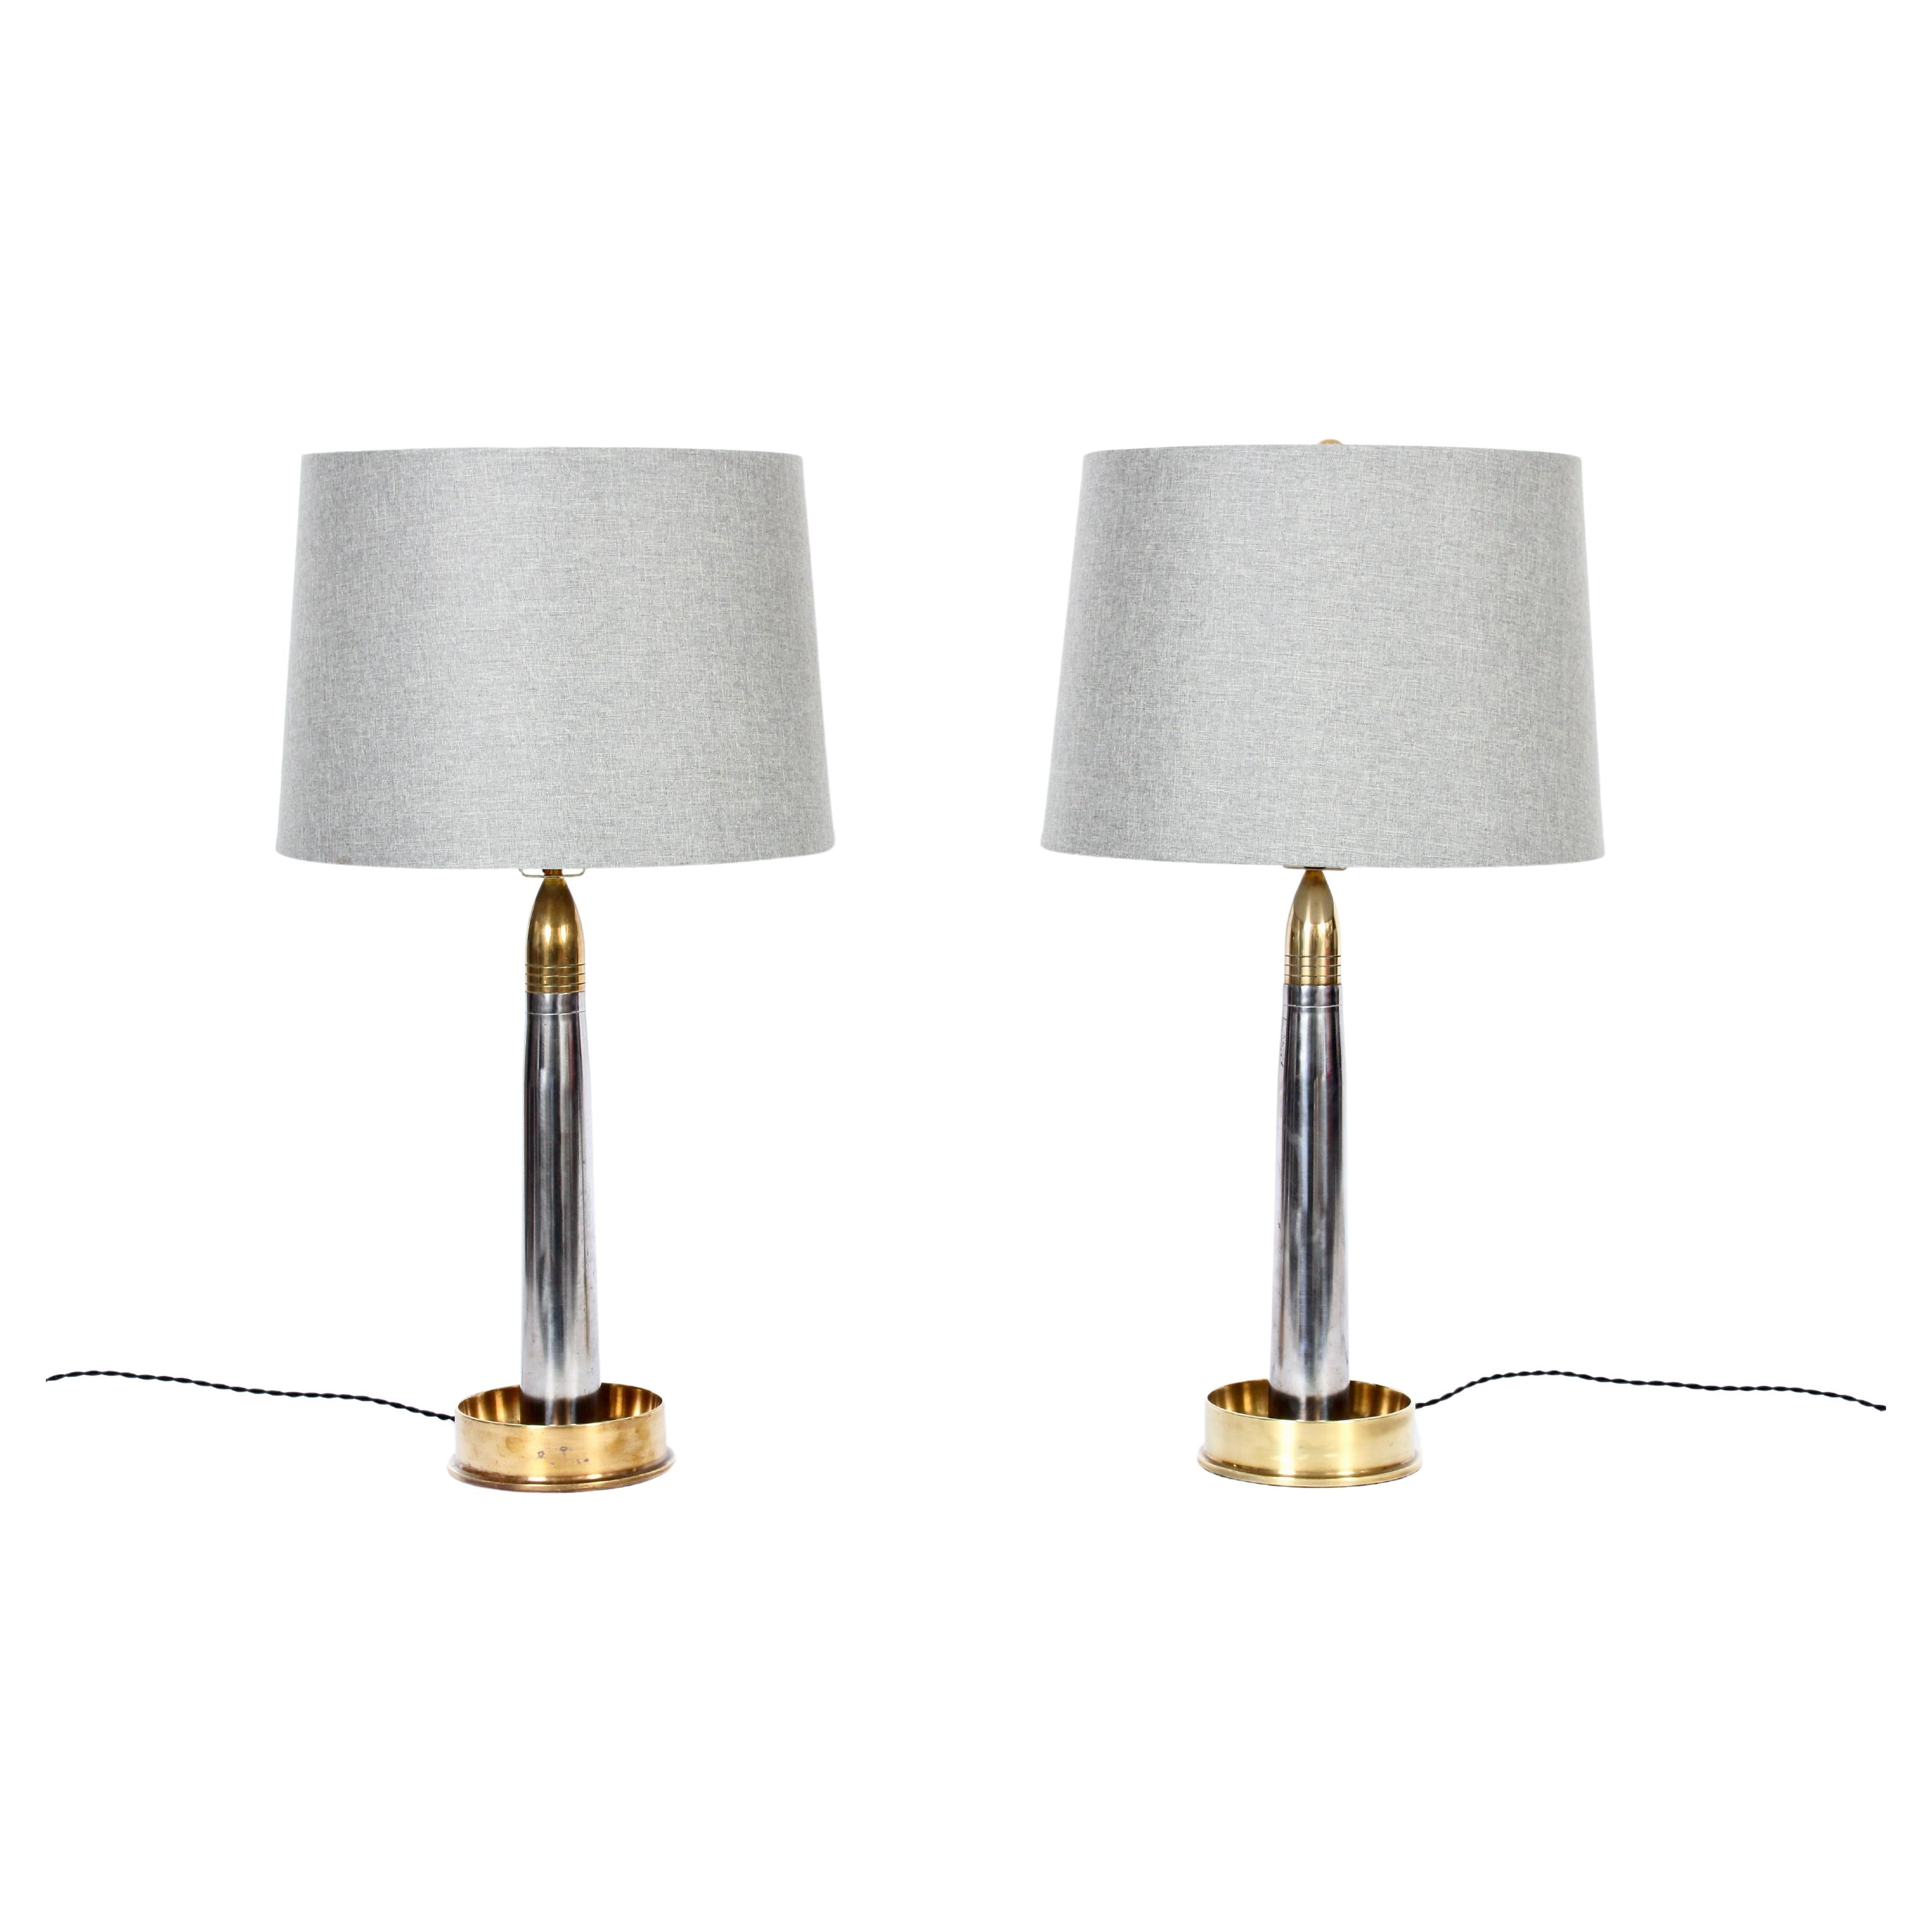 Pair of World War Two Nickel Plate & Solid Brass mortar shell Trench Art table lamps. Featuring heavy, hand machined, reflective nickel-plated brass mortar column-forms, fitted to larger (cupped) round brass mortar shell base. Fine Art Deco design.